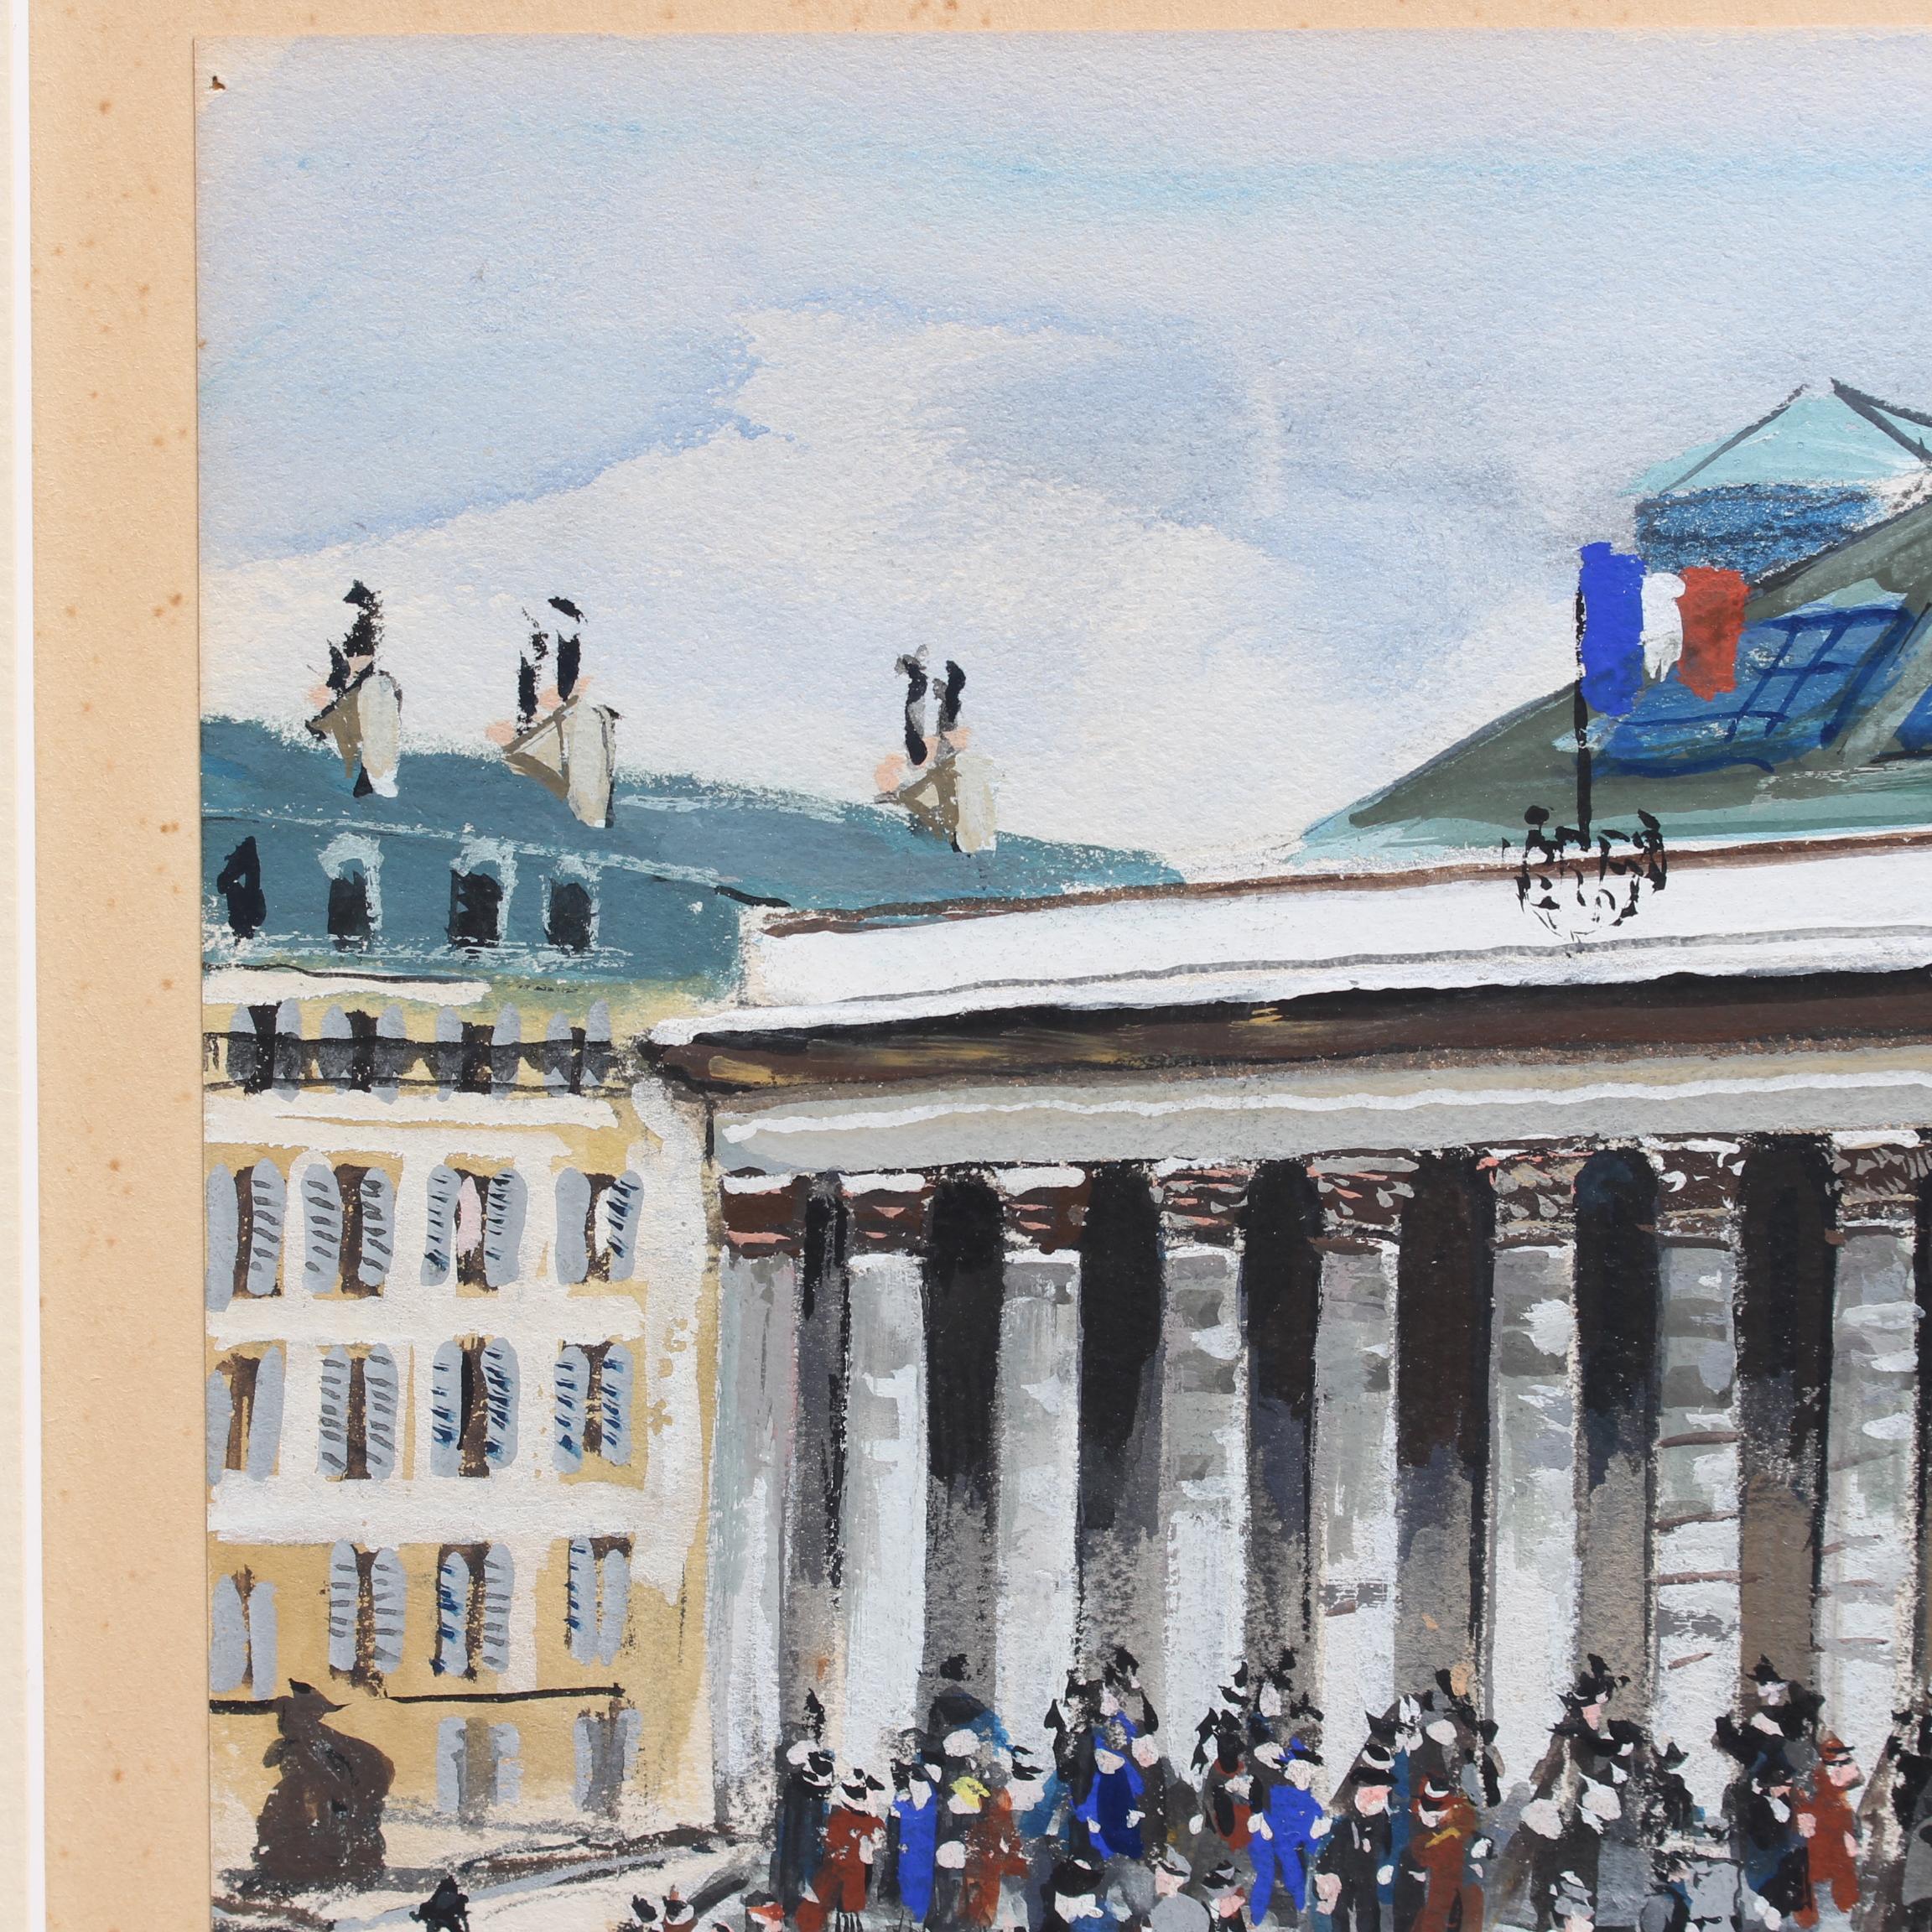 'Paris, la Bourse', gouache on paper, by Lucien Génin (circa 1930s). Created at the beginning of the 19th century by Napoleon, la Bourse, or the Stock Exchange, was intended to assert and encourage France’s prosperity in industry and trade. In 1826